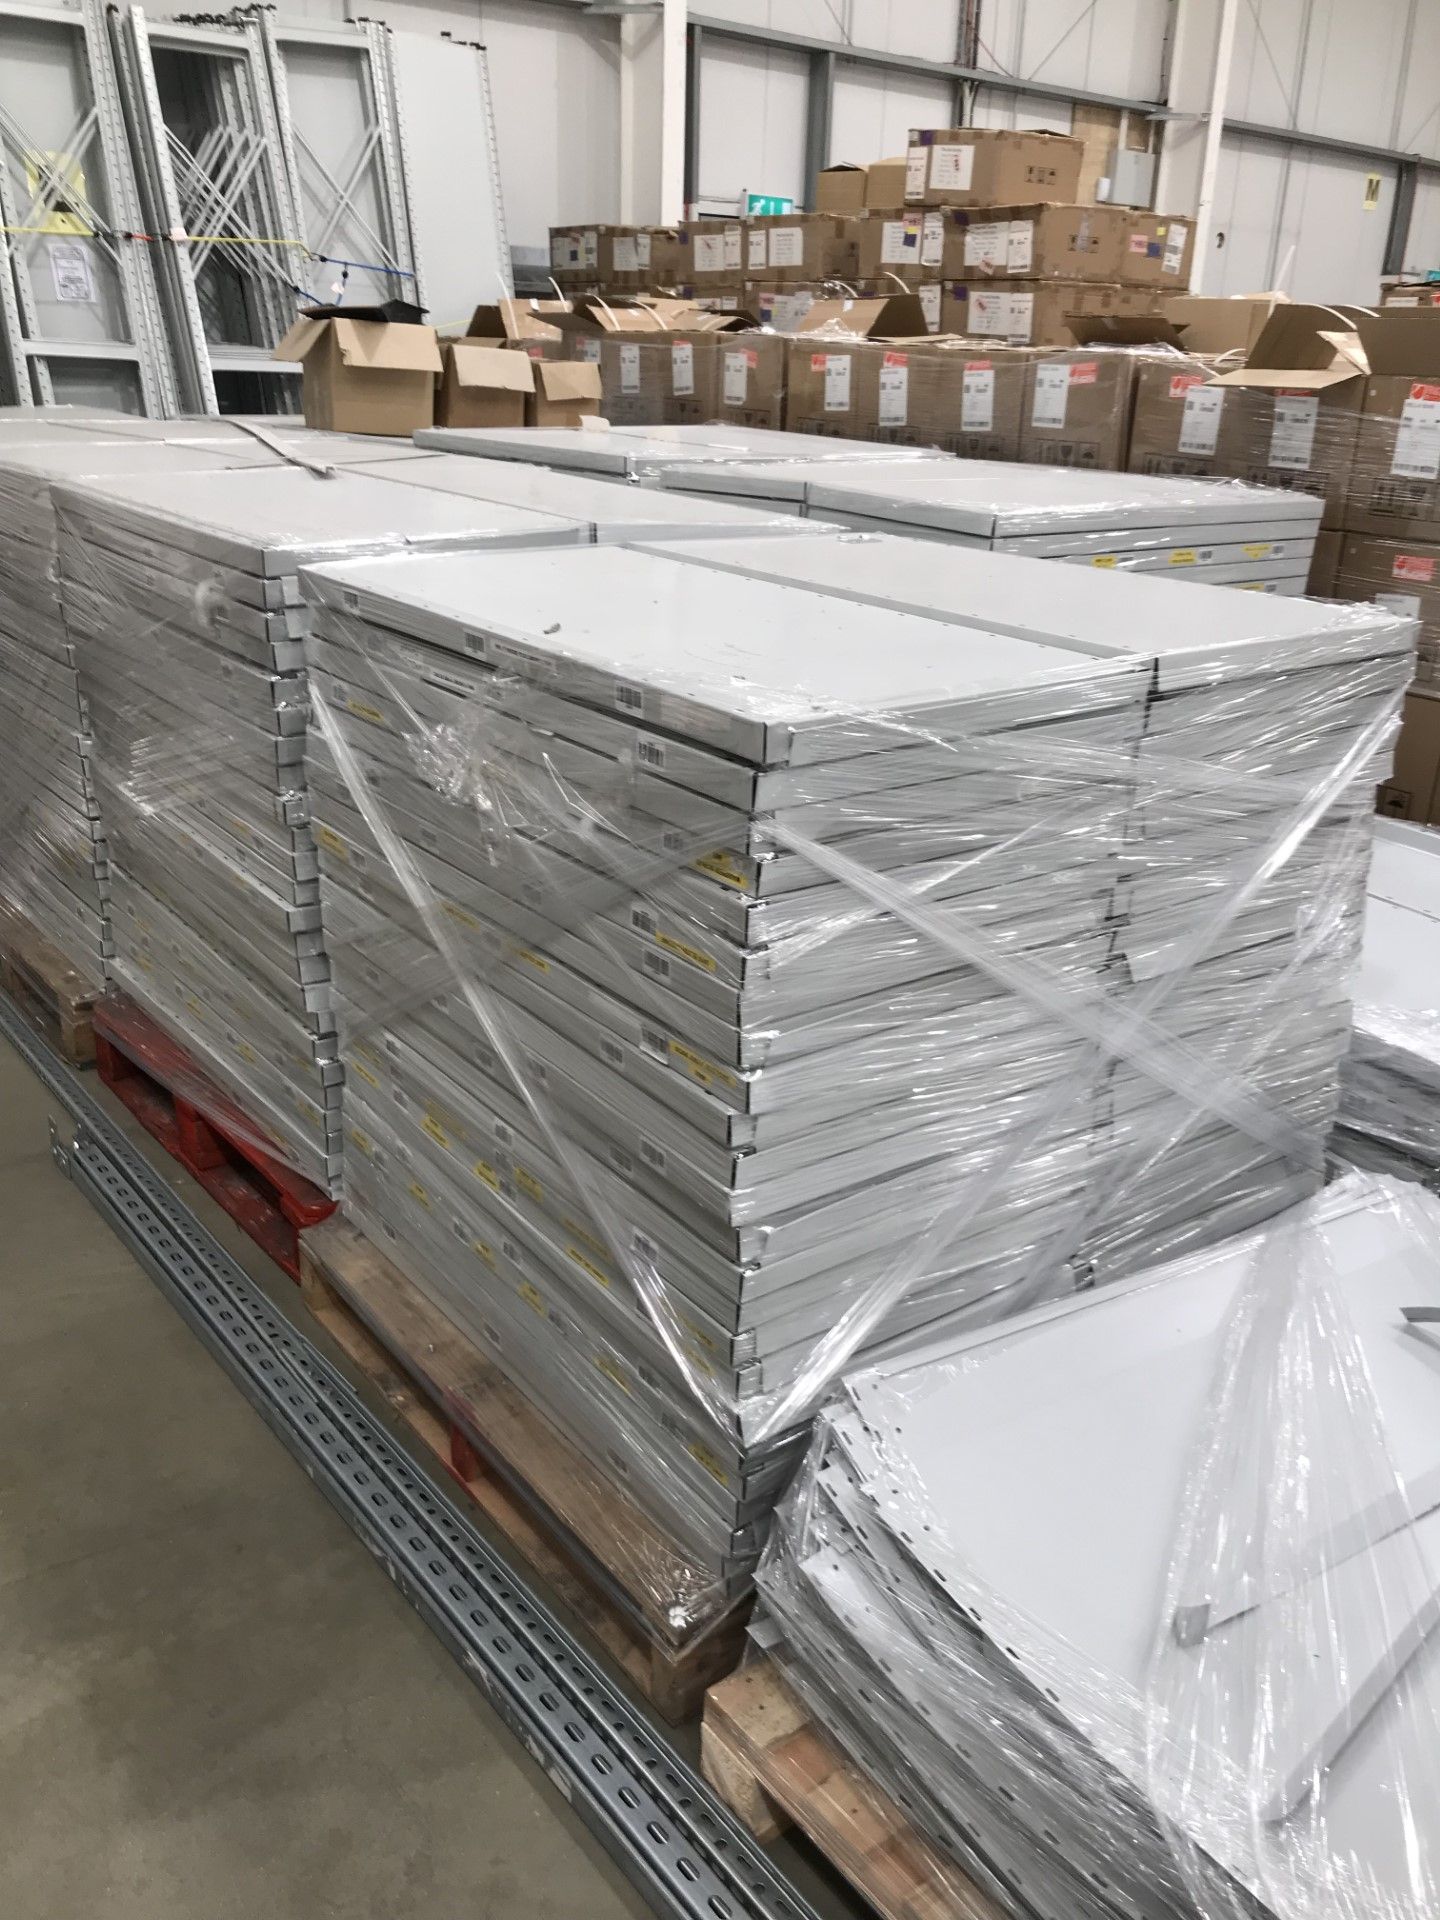 Link 51 racking – less than 5 years old installed new Aug 2019 - Image 3 of 7